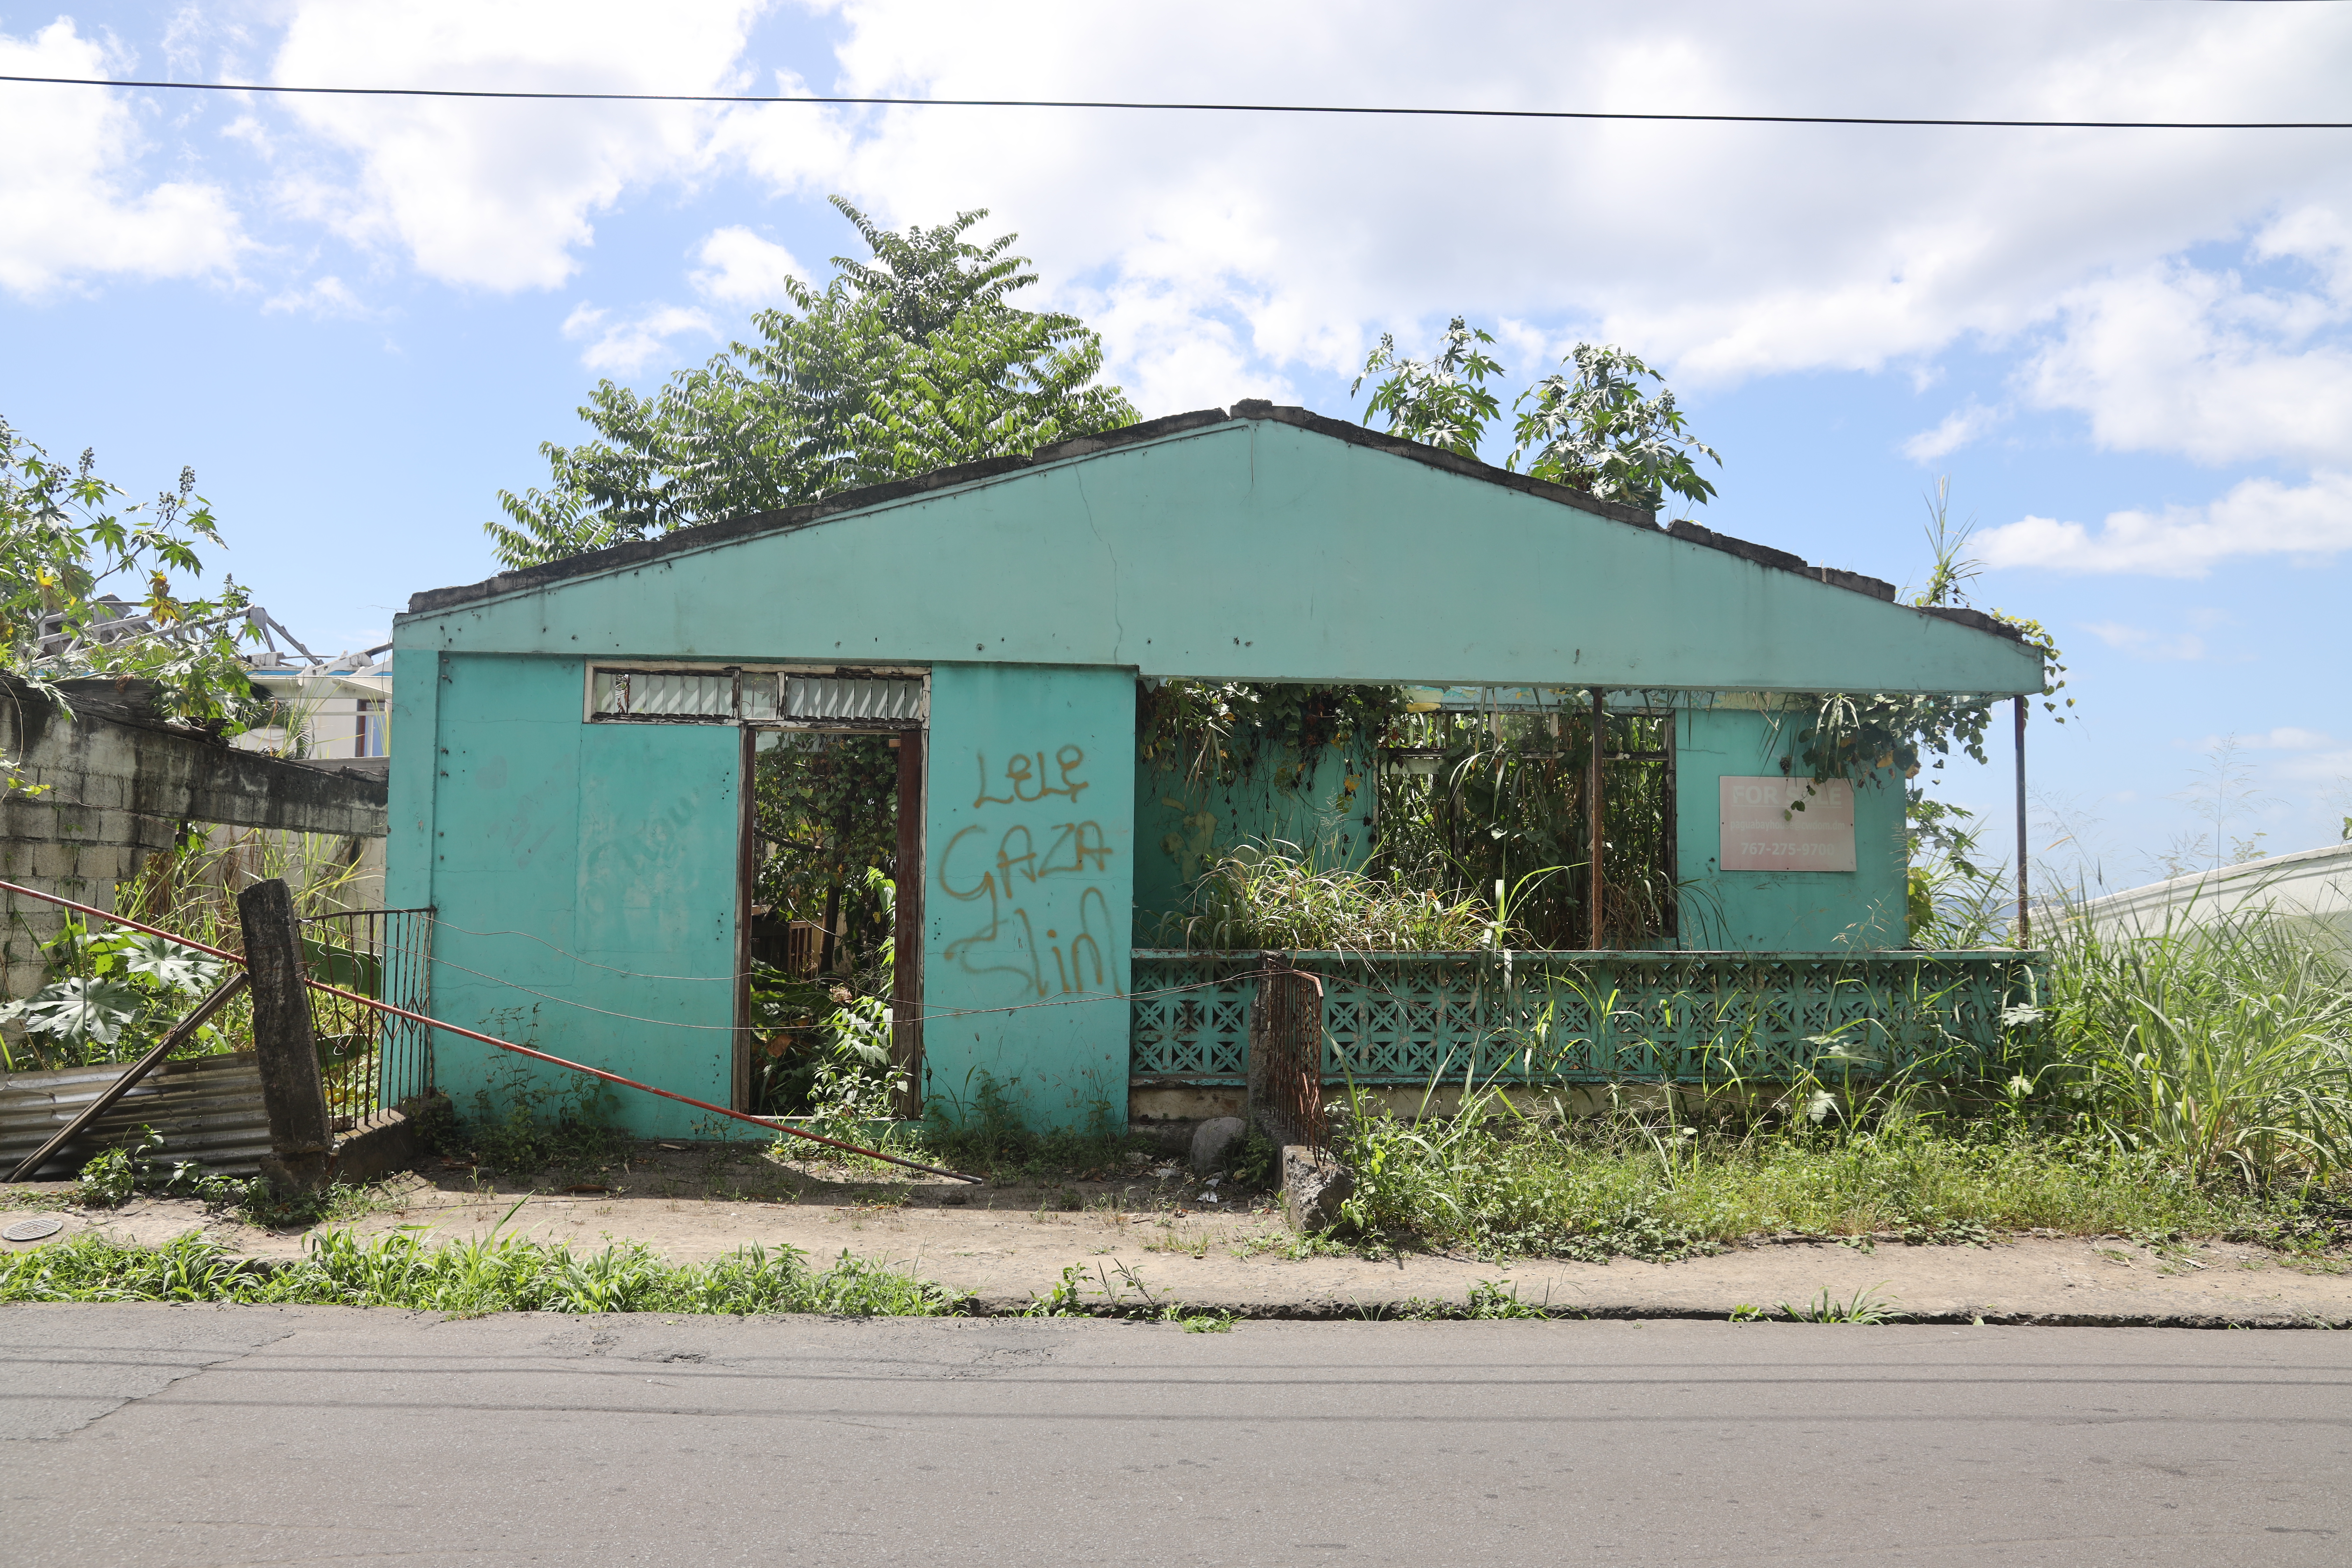 A home, damaged and abandoned, on the southwest coast of Dominica.